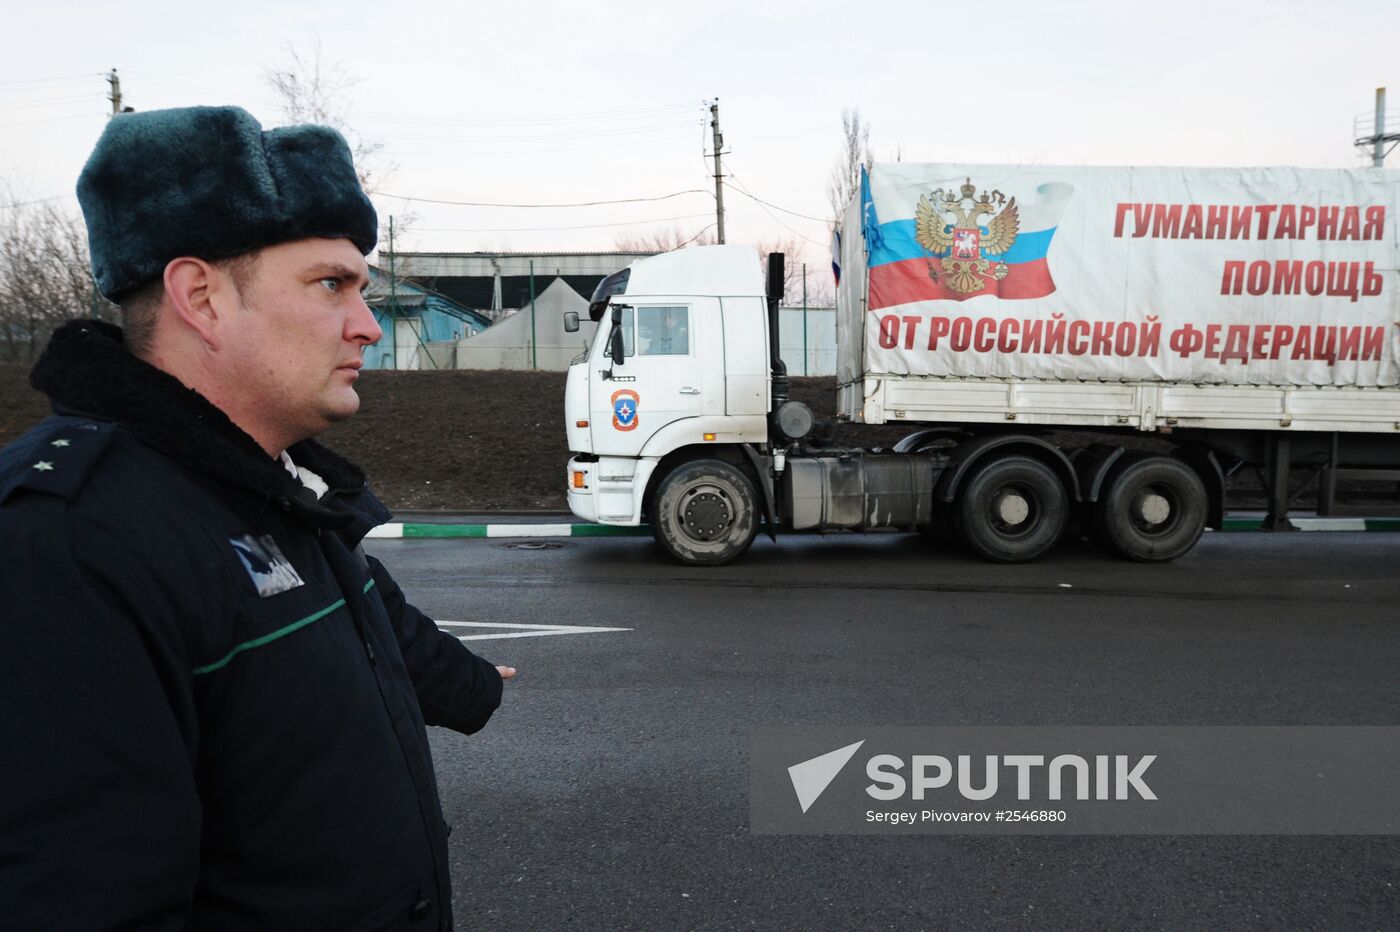 Russia's tenth humanitarian aid convoy arrives at Donetsk border checkpoint